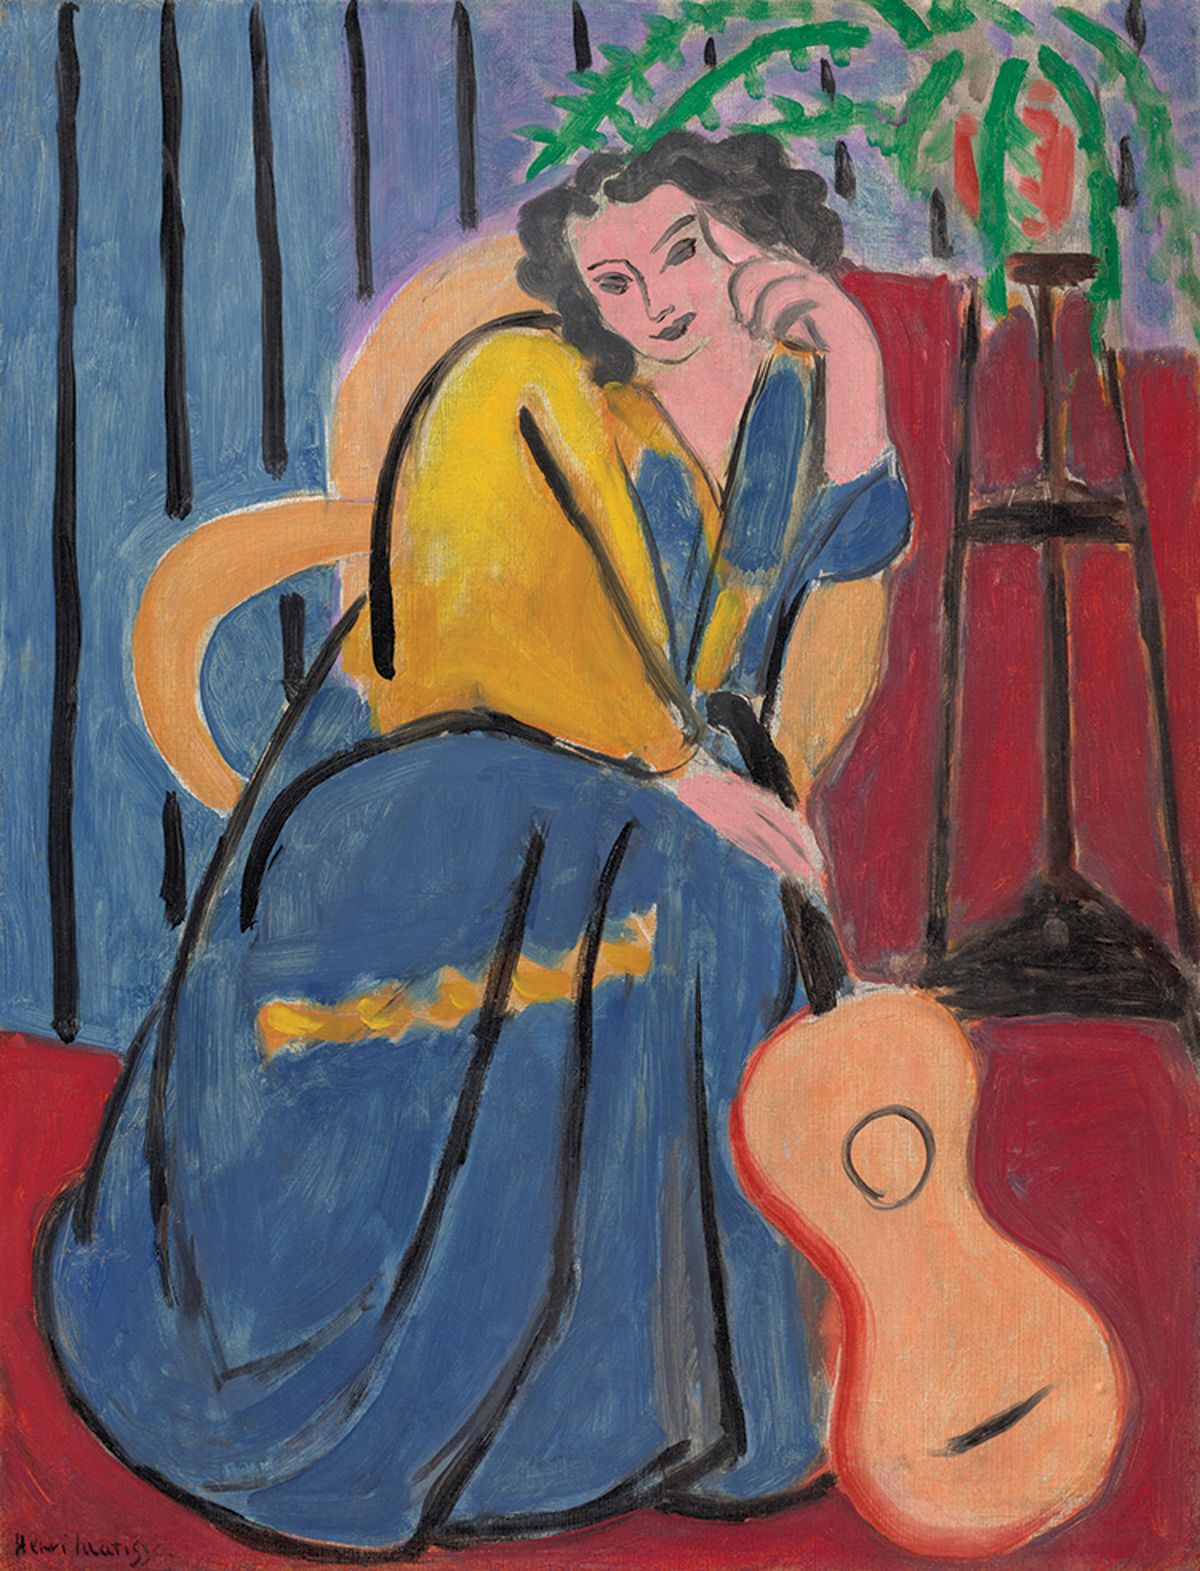 Henri Matisse’s Girl in Yellow and Blue with Guitar (1939) was seized from the dealer Paul Rosenberg Art Institute of Chicago/Art Resource, NY; Succession H. Matisse/ARS, NY